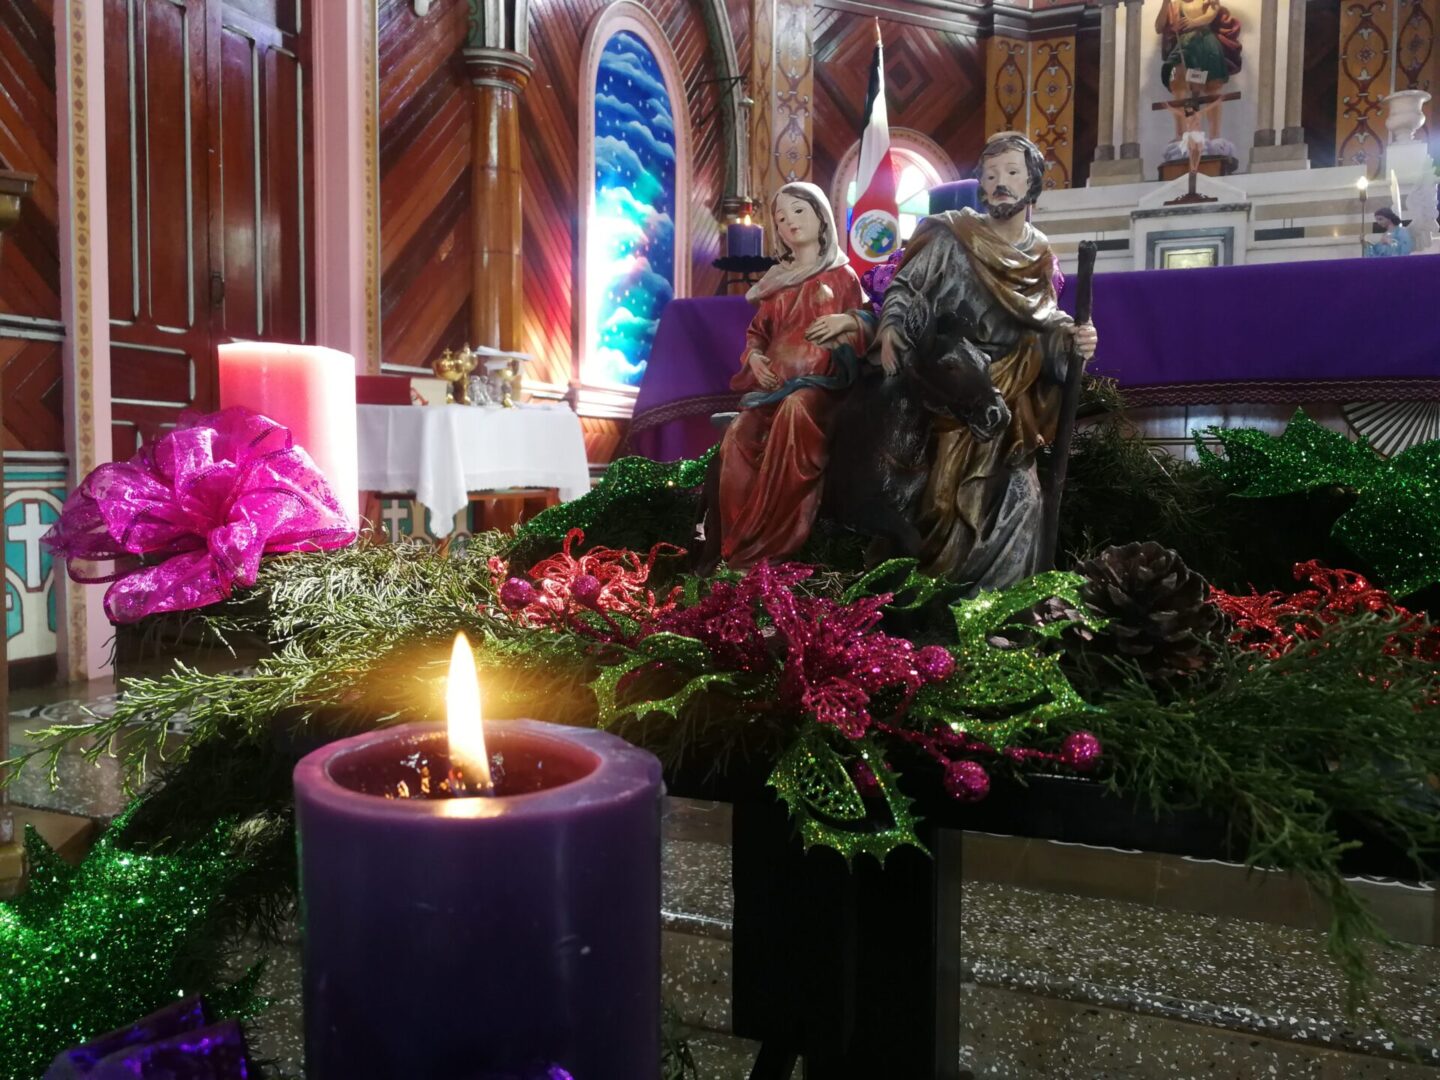 Inside view of a church with jesus and mary statue